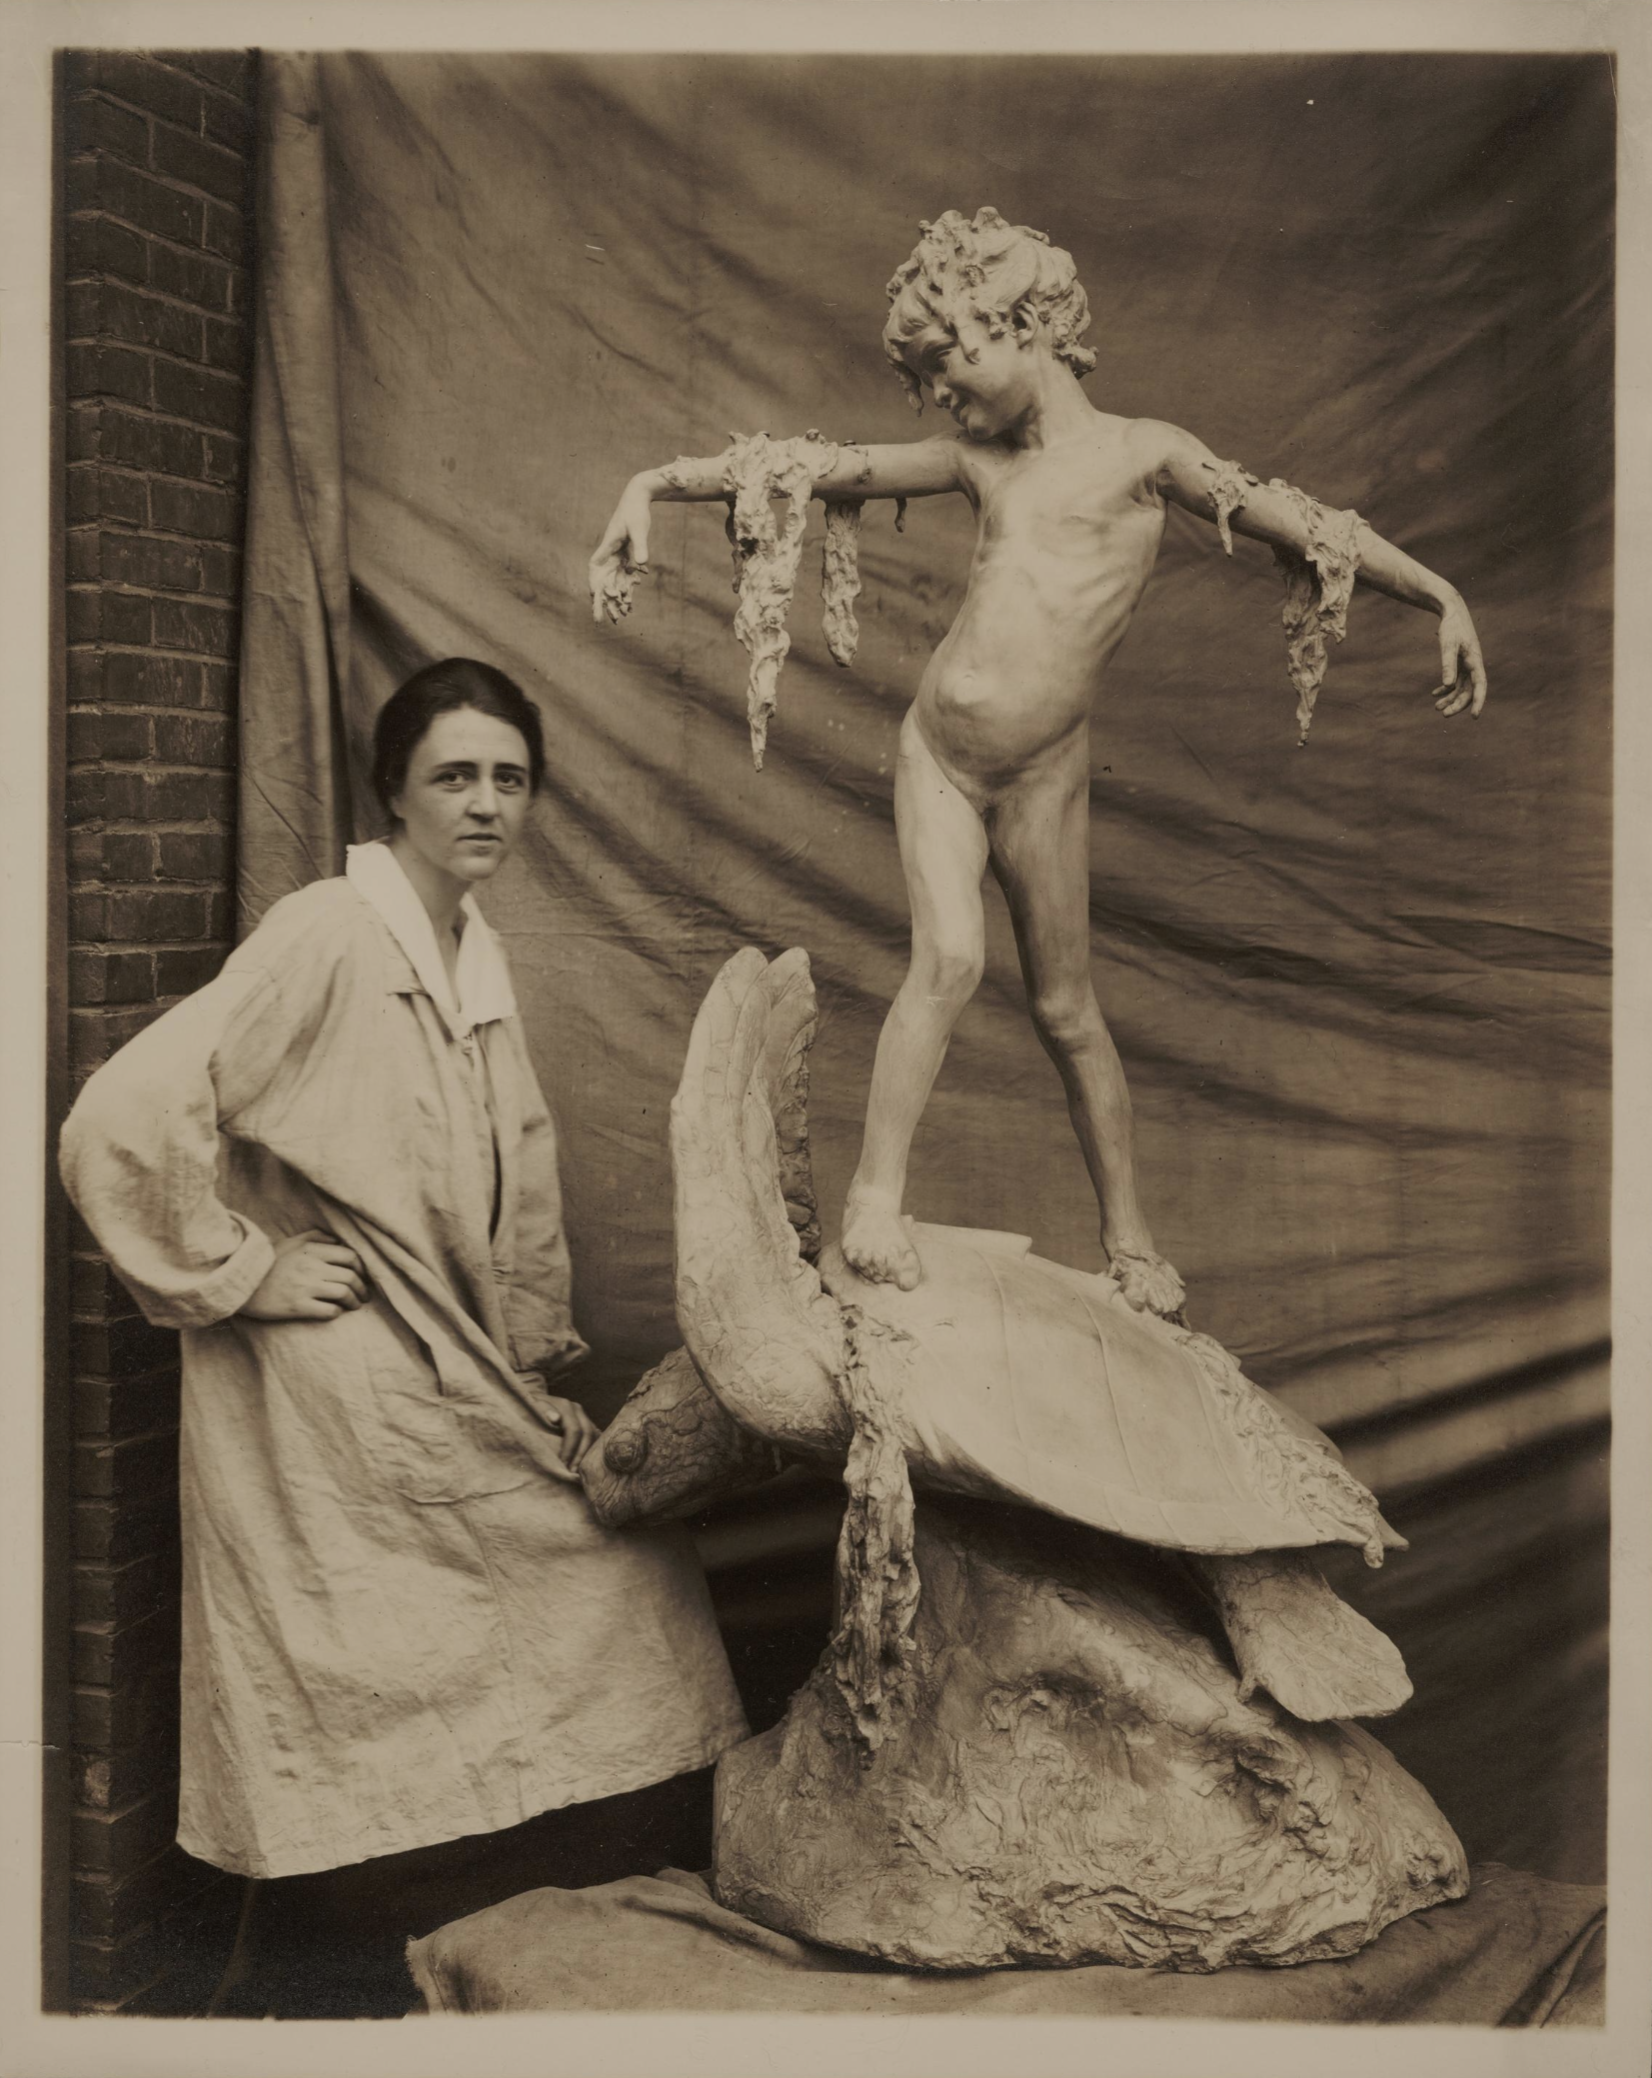 A black and white photo of sculptor Beatrice Fenton with her sculpture Seaweed Girl Fountain in the artist's studio